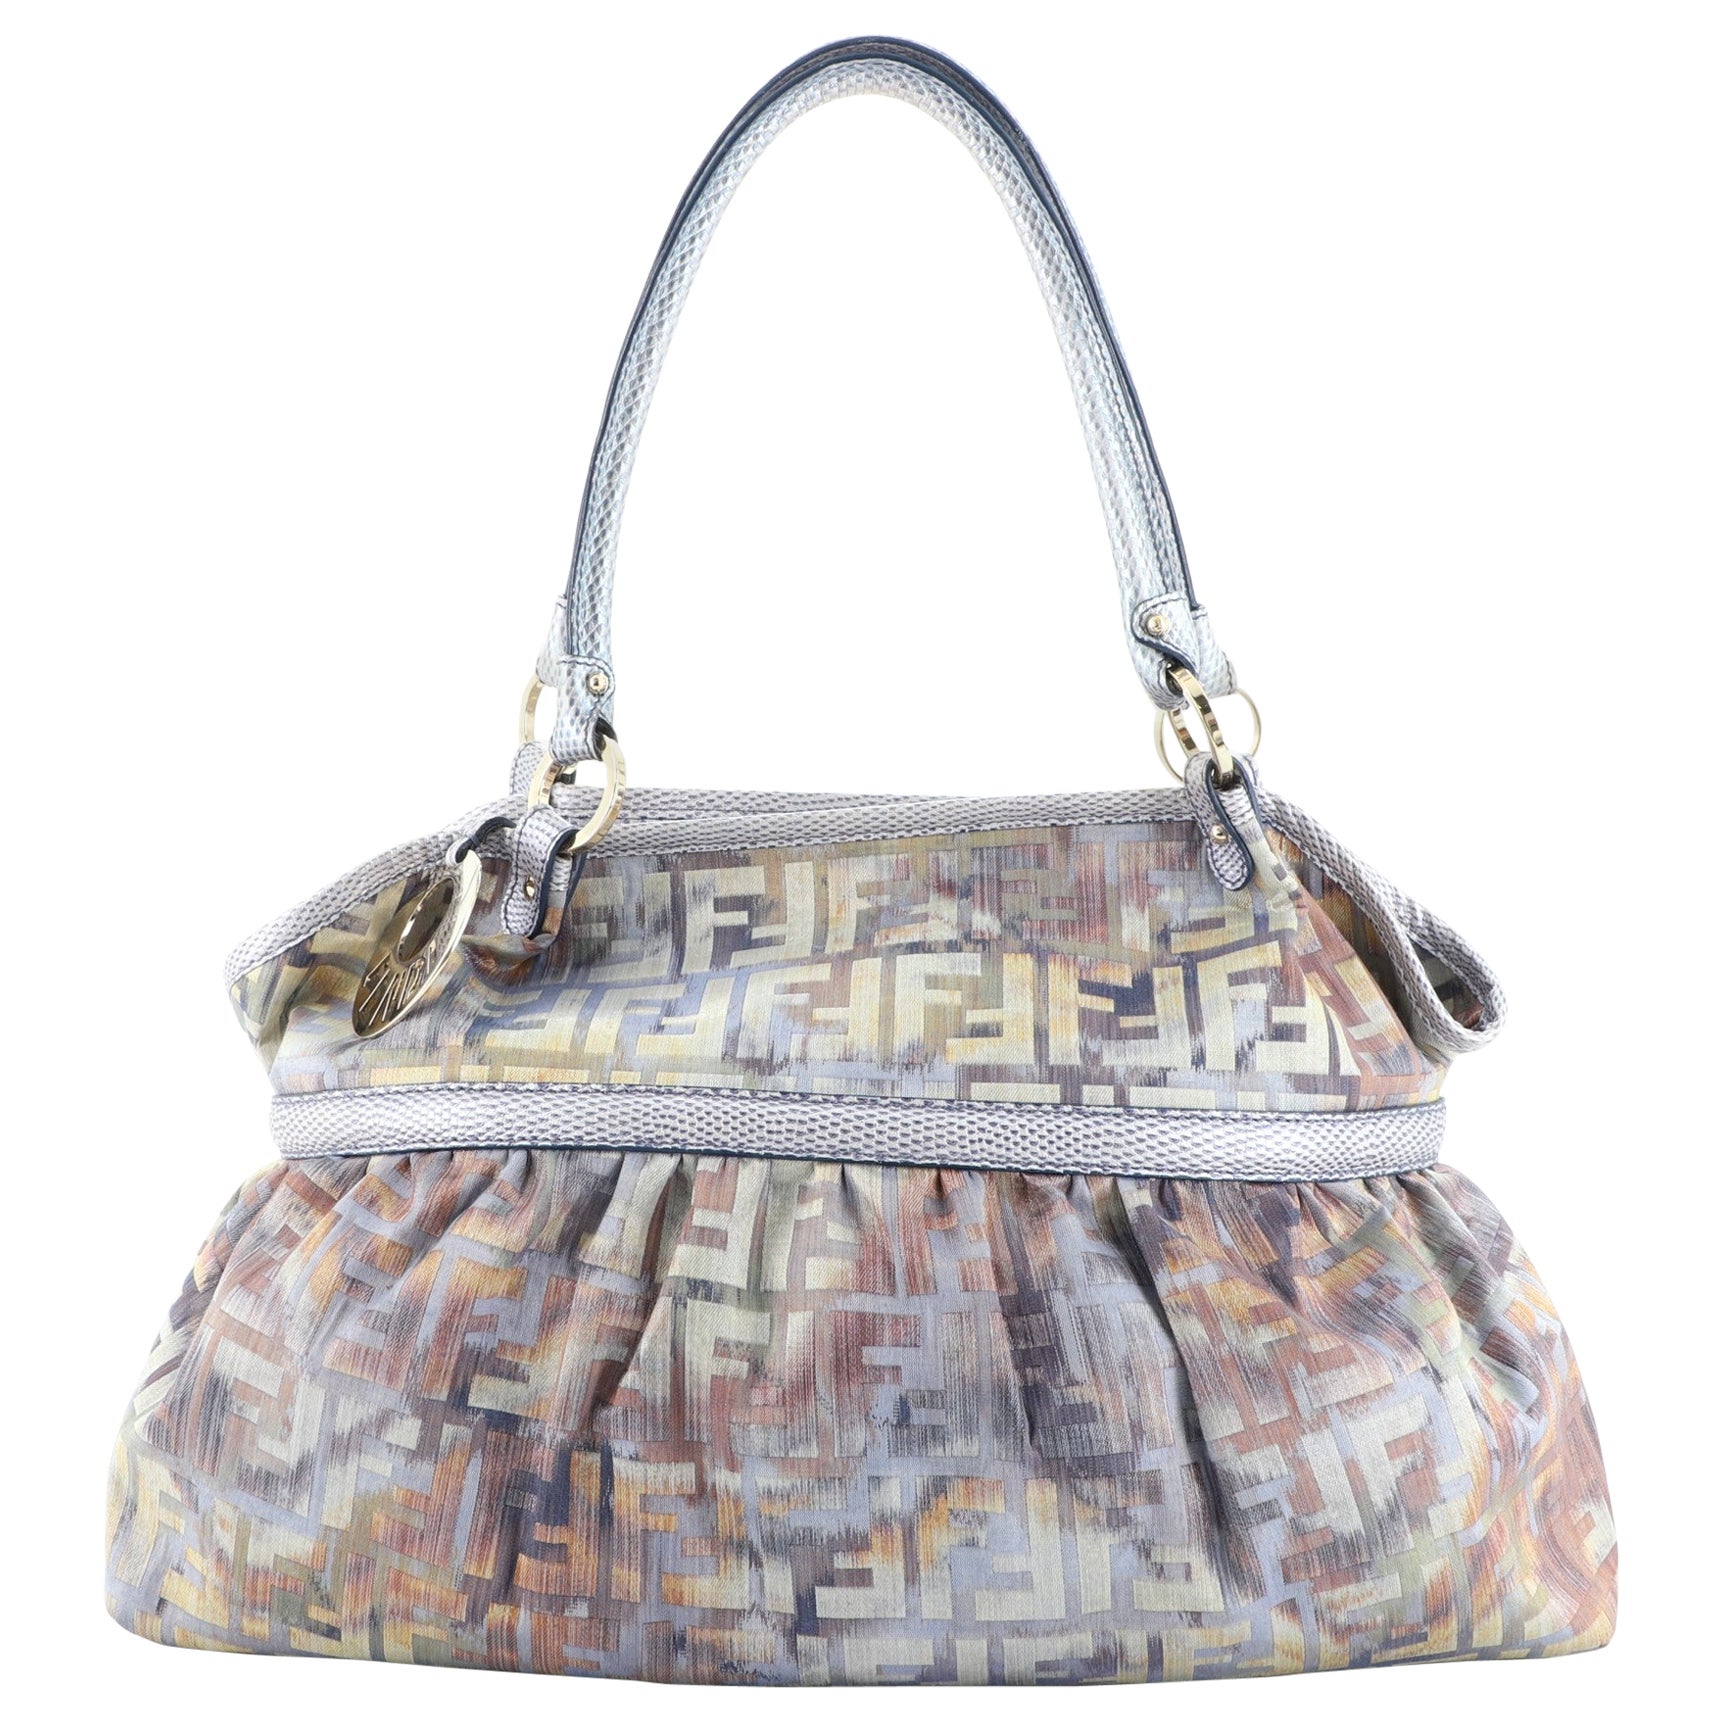 Fendi Chef Shoulder Bag Multicolor Zucca Canvas with Lizard Embossed Leather